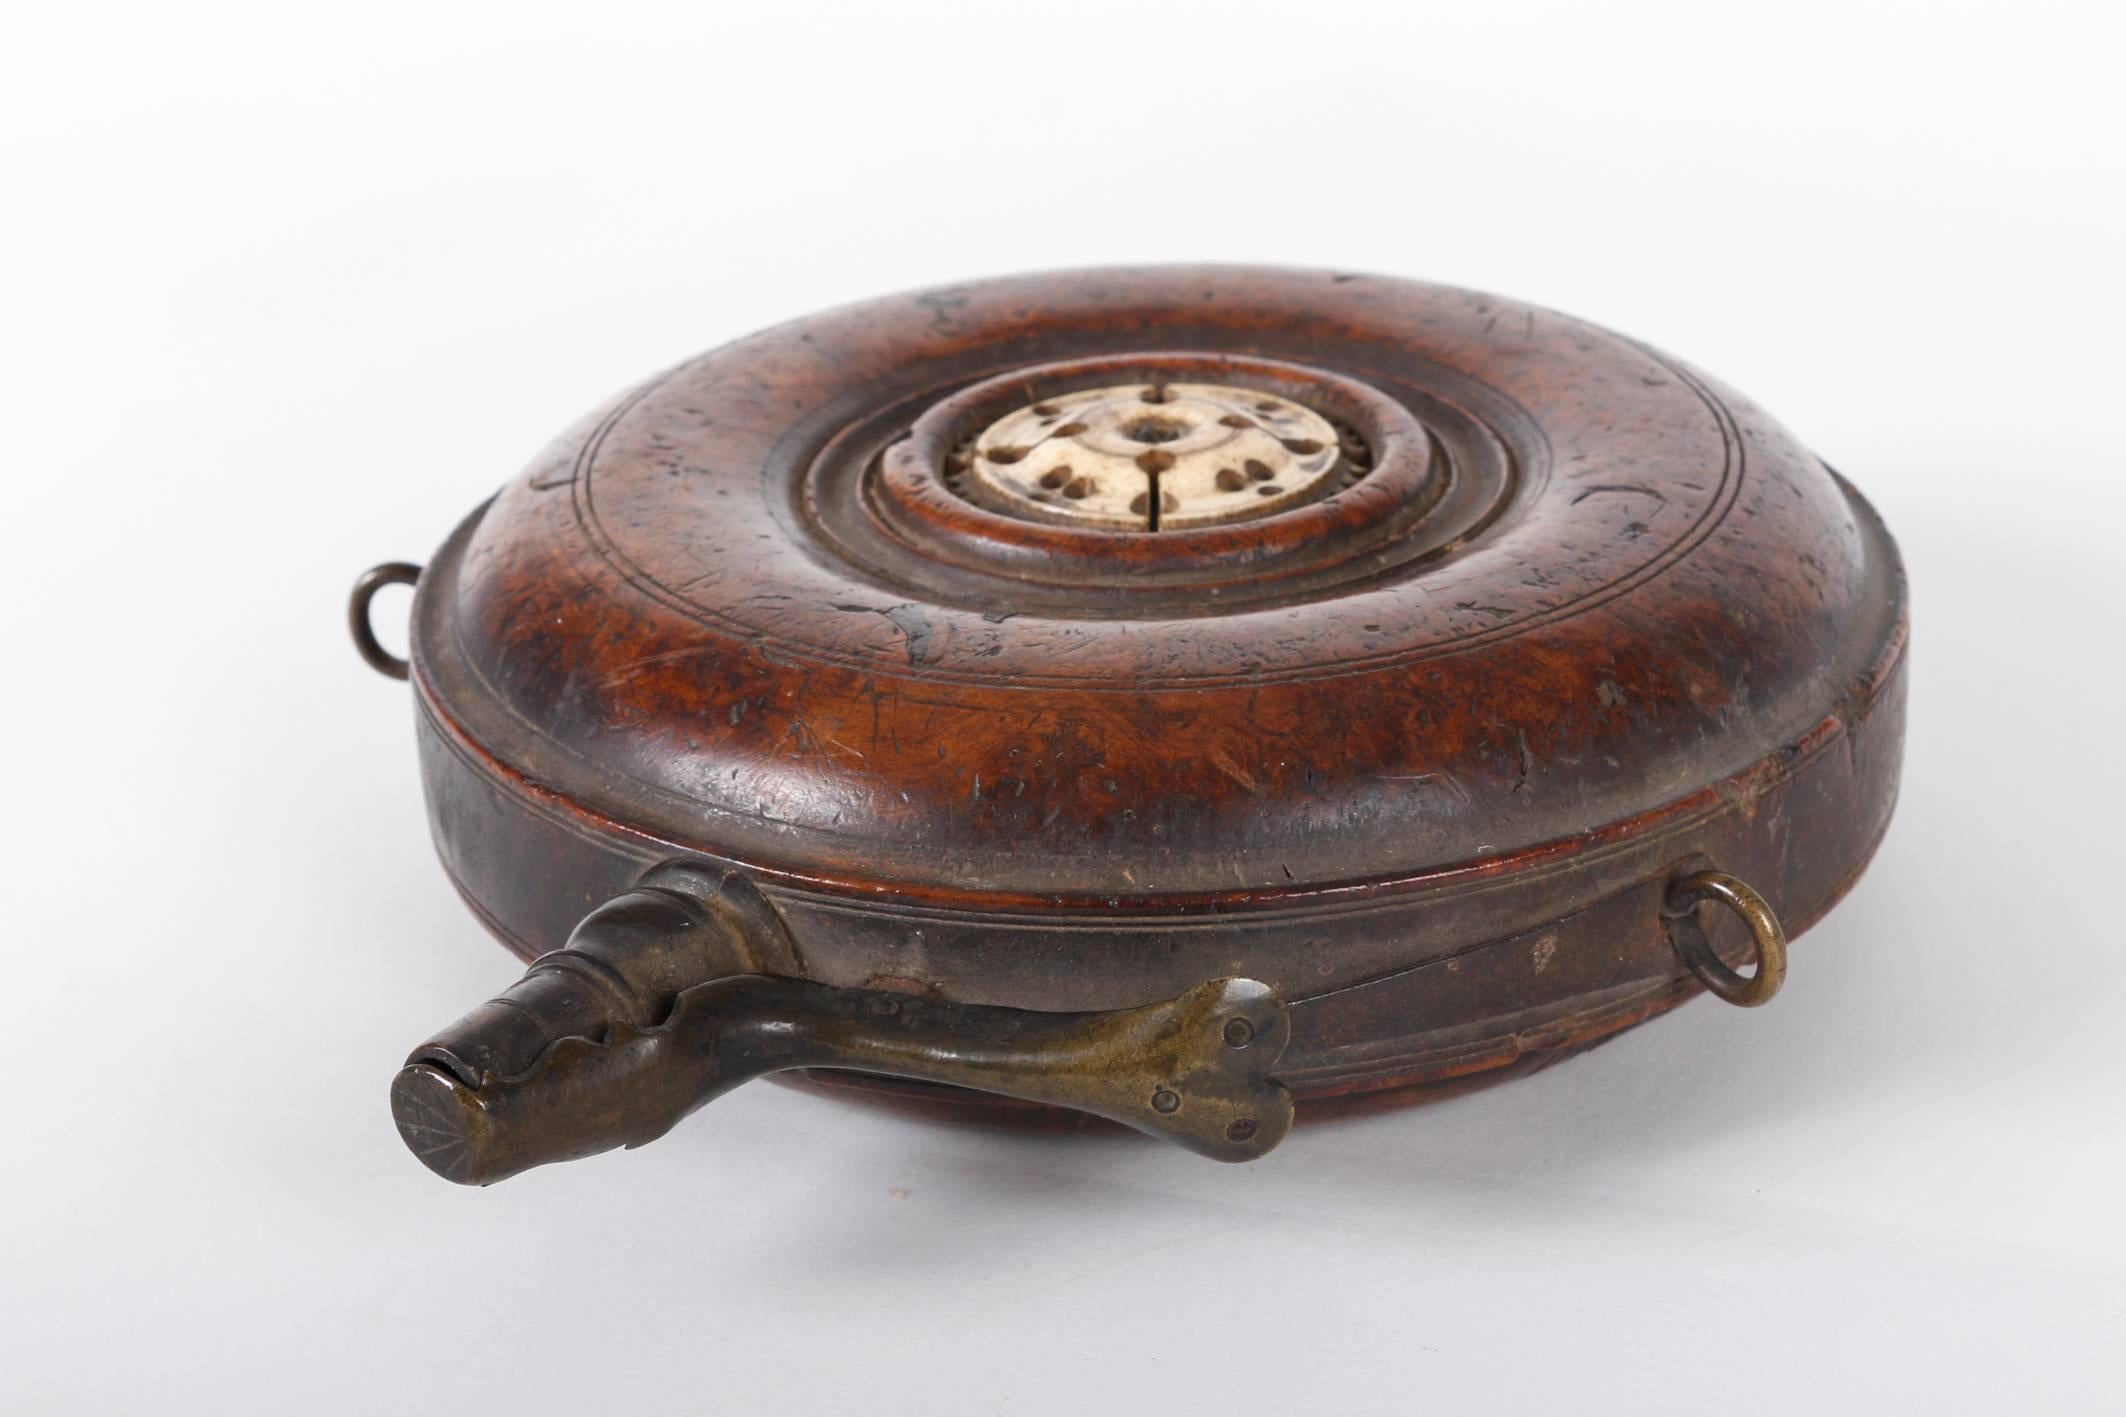 Probably made in Nuremberg or Augsburg, made of turned burl wood with
beautiful brown color, iron and horn.